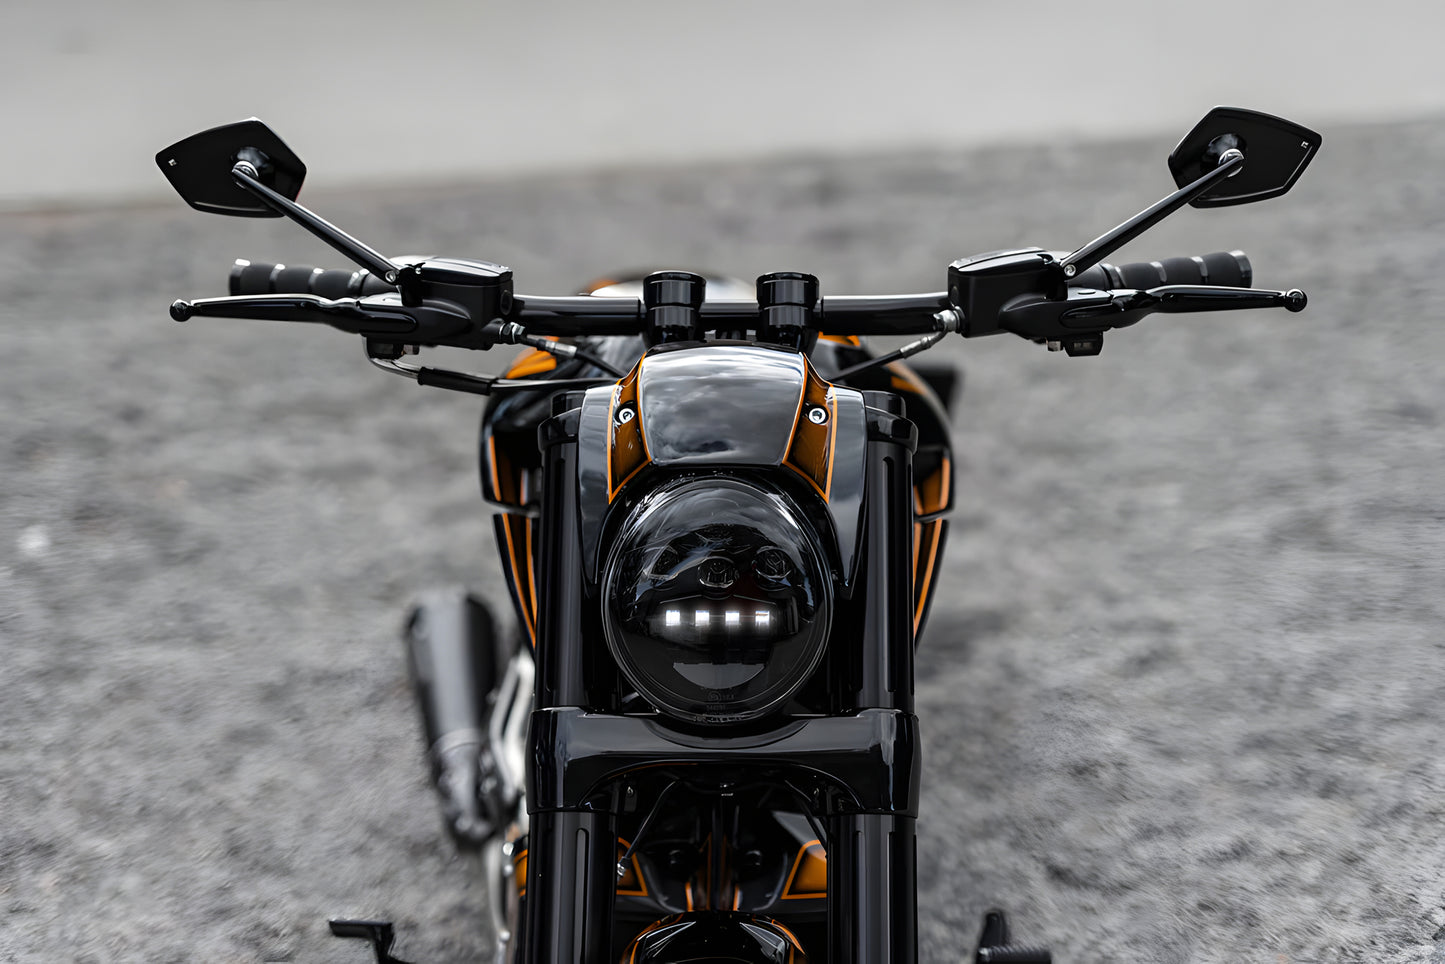 Harley Davidson motorcycle with Killer Custom black LED headlight kit V-Rod from the front blurry background